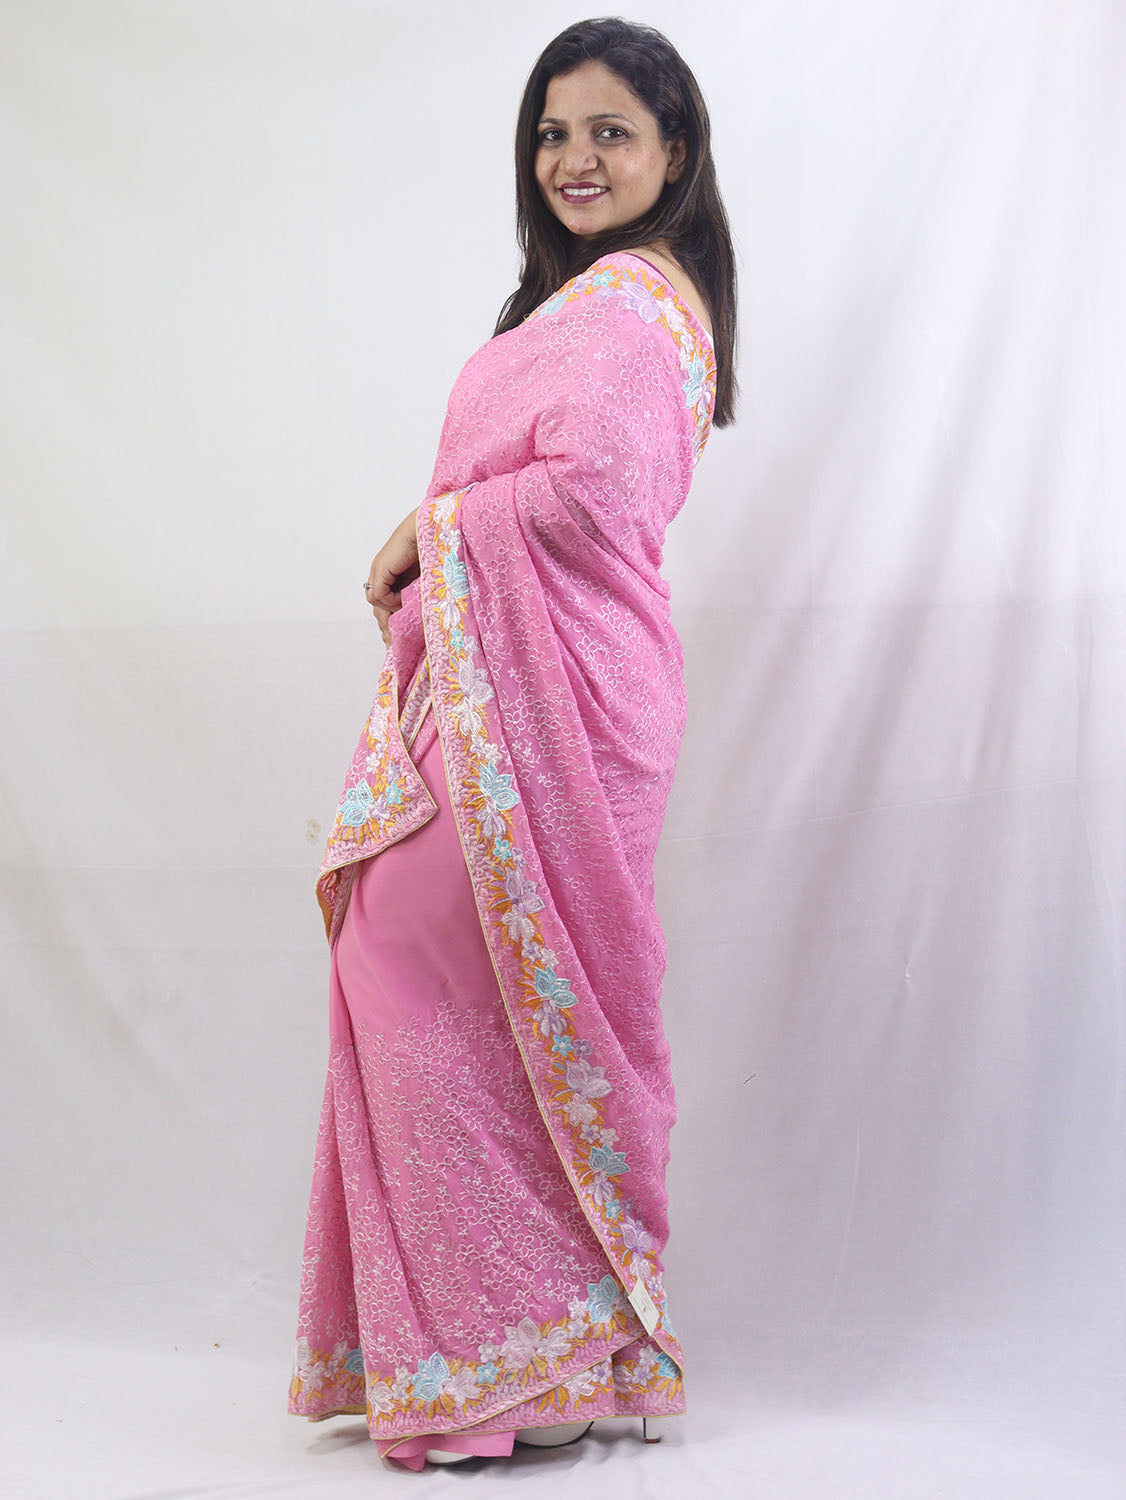 Stunning Pink Georgette Saree with Intricate Thread Work Embroidery